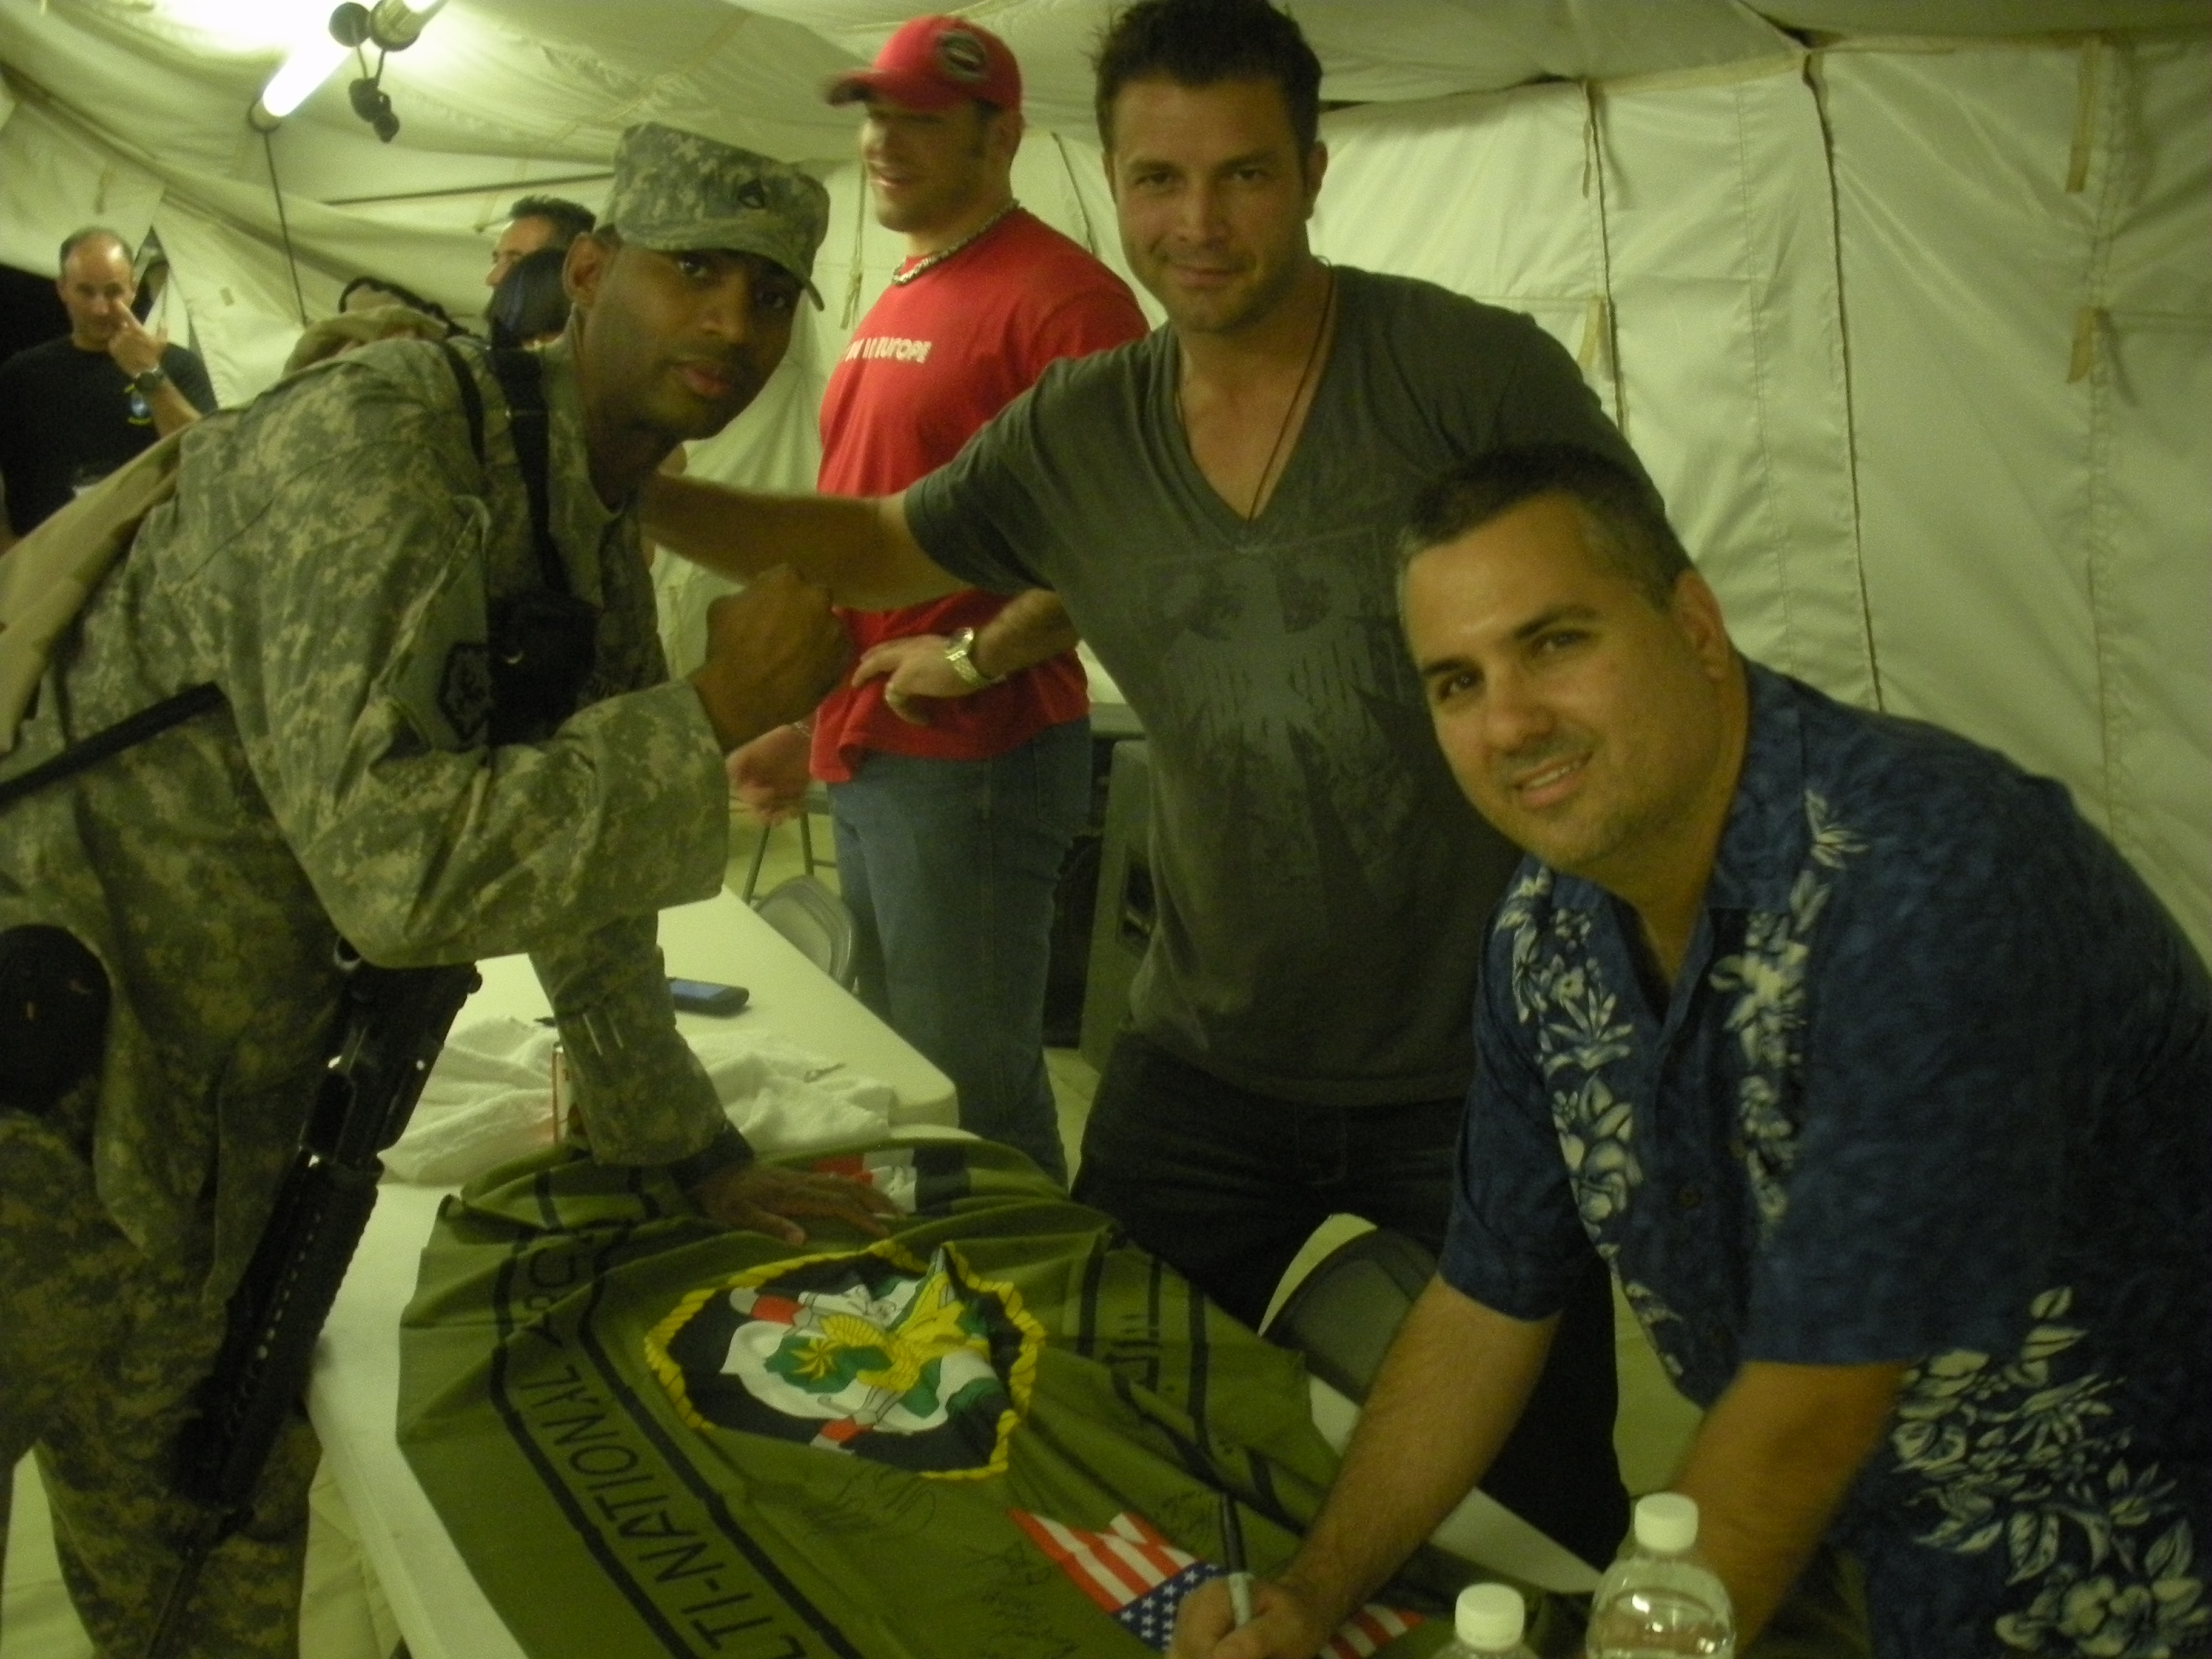 Daniel Zirilli (right) at meet and greet with US Troops at Camp Victory, Iraq, on 8 location tour screening Circle Of Pain (2010)